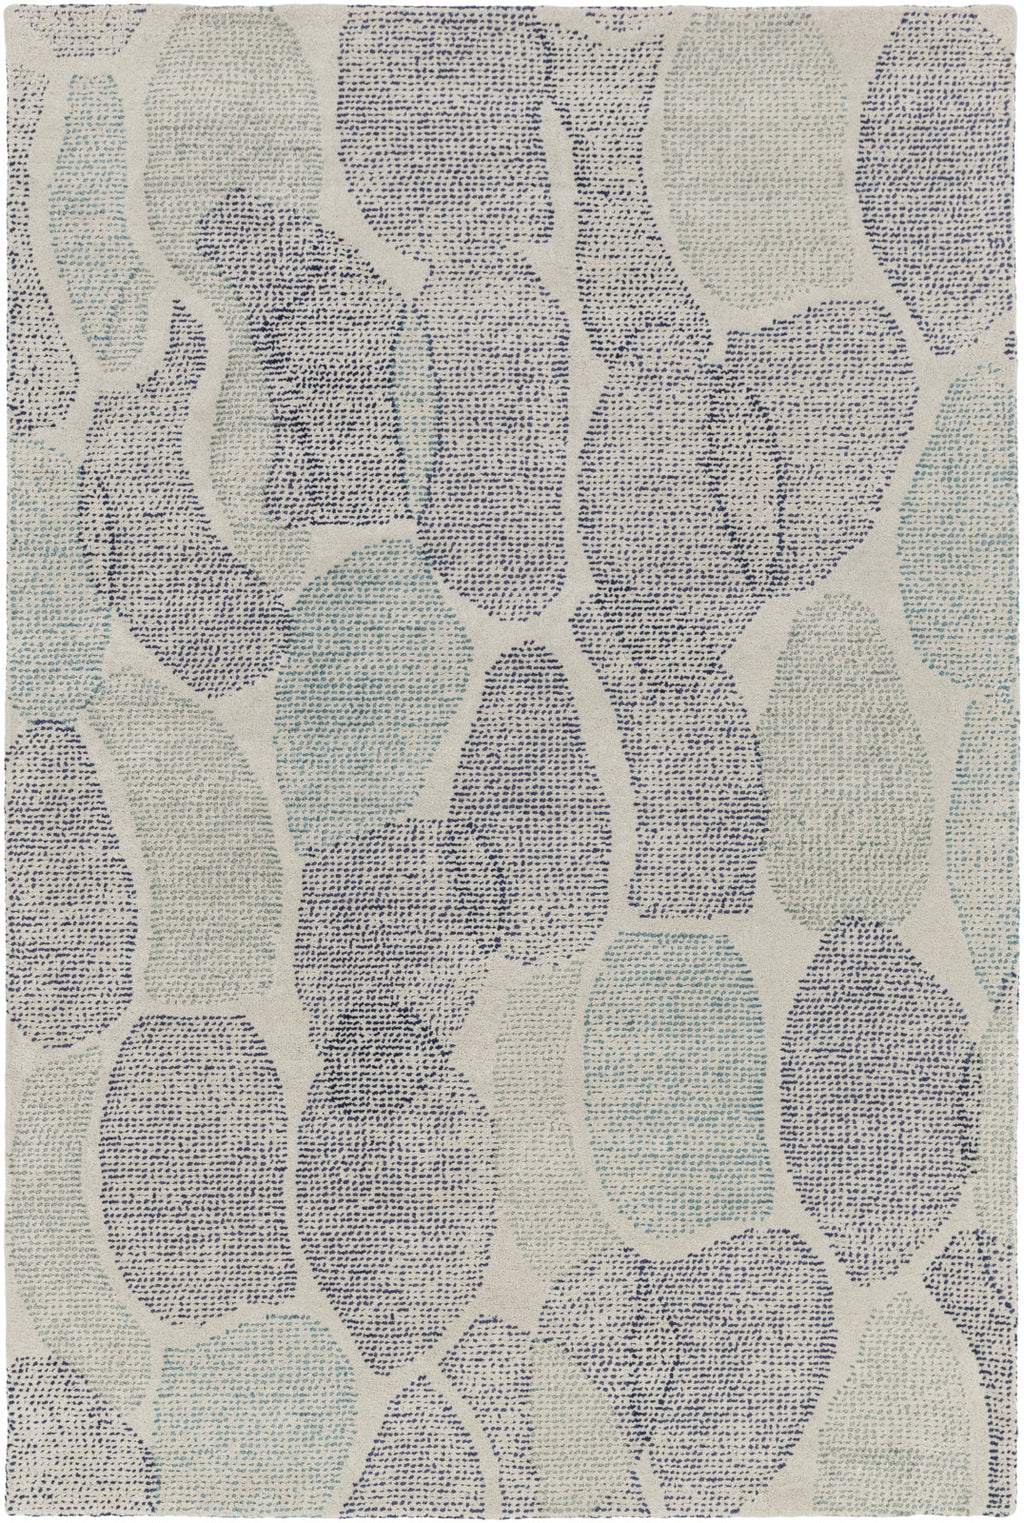 Melody MDY-2008 Gray Area Rug by Surya